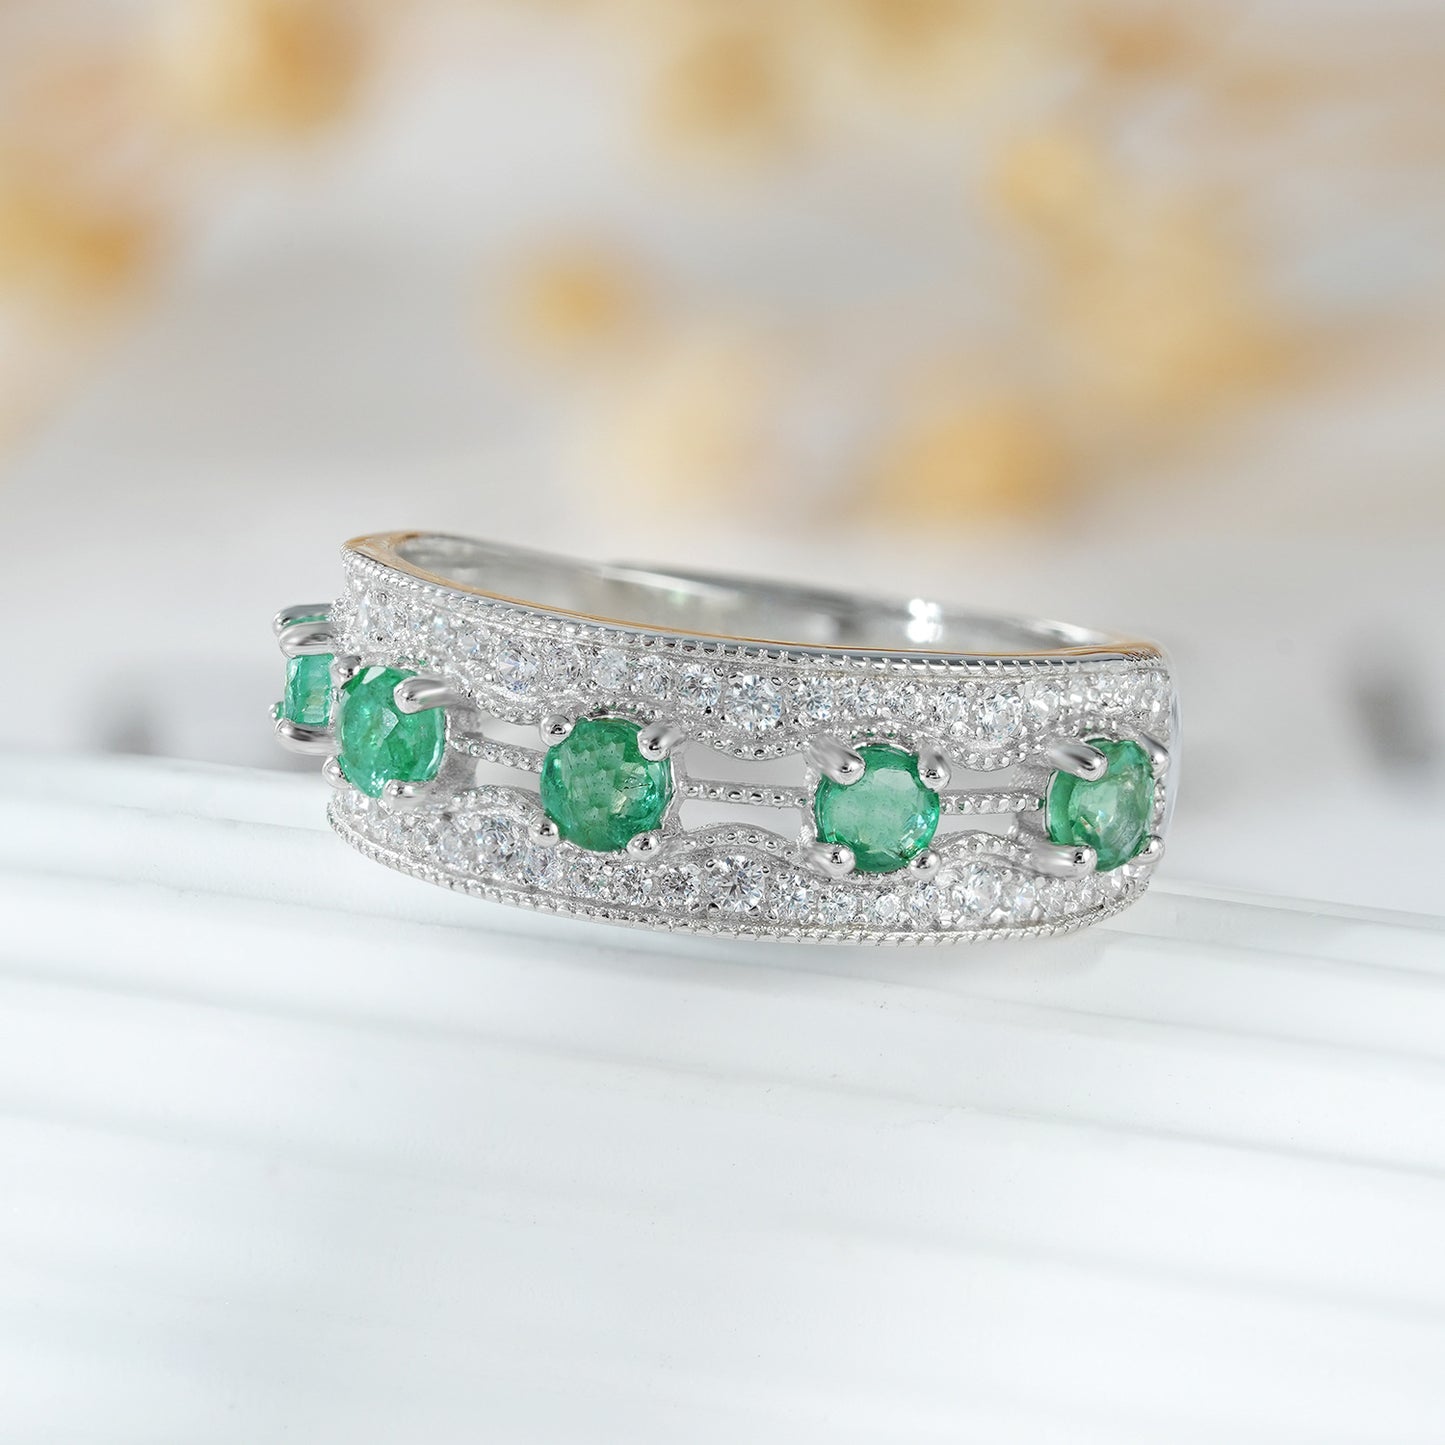 Light And Extravagant Style, Small Design Sense, Emerald Row Ring